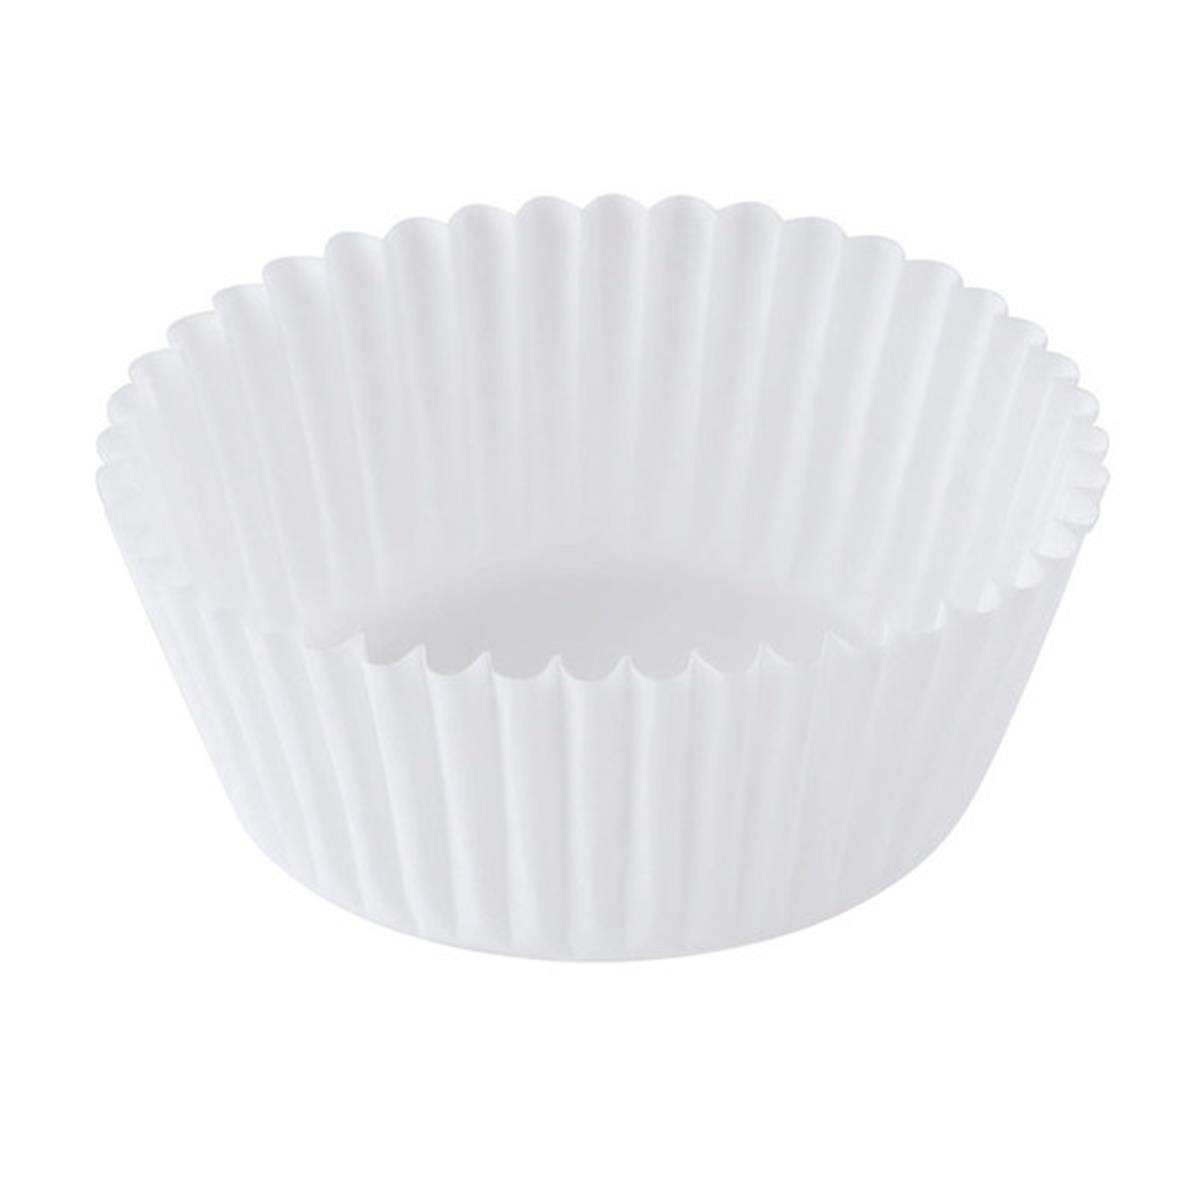 Picture of Reynolds FC225X600 CPC 2.25 x 6 in. White Bake Cup, Case of 10000